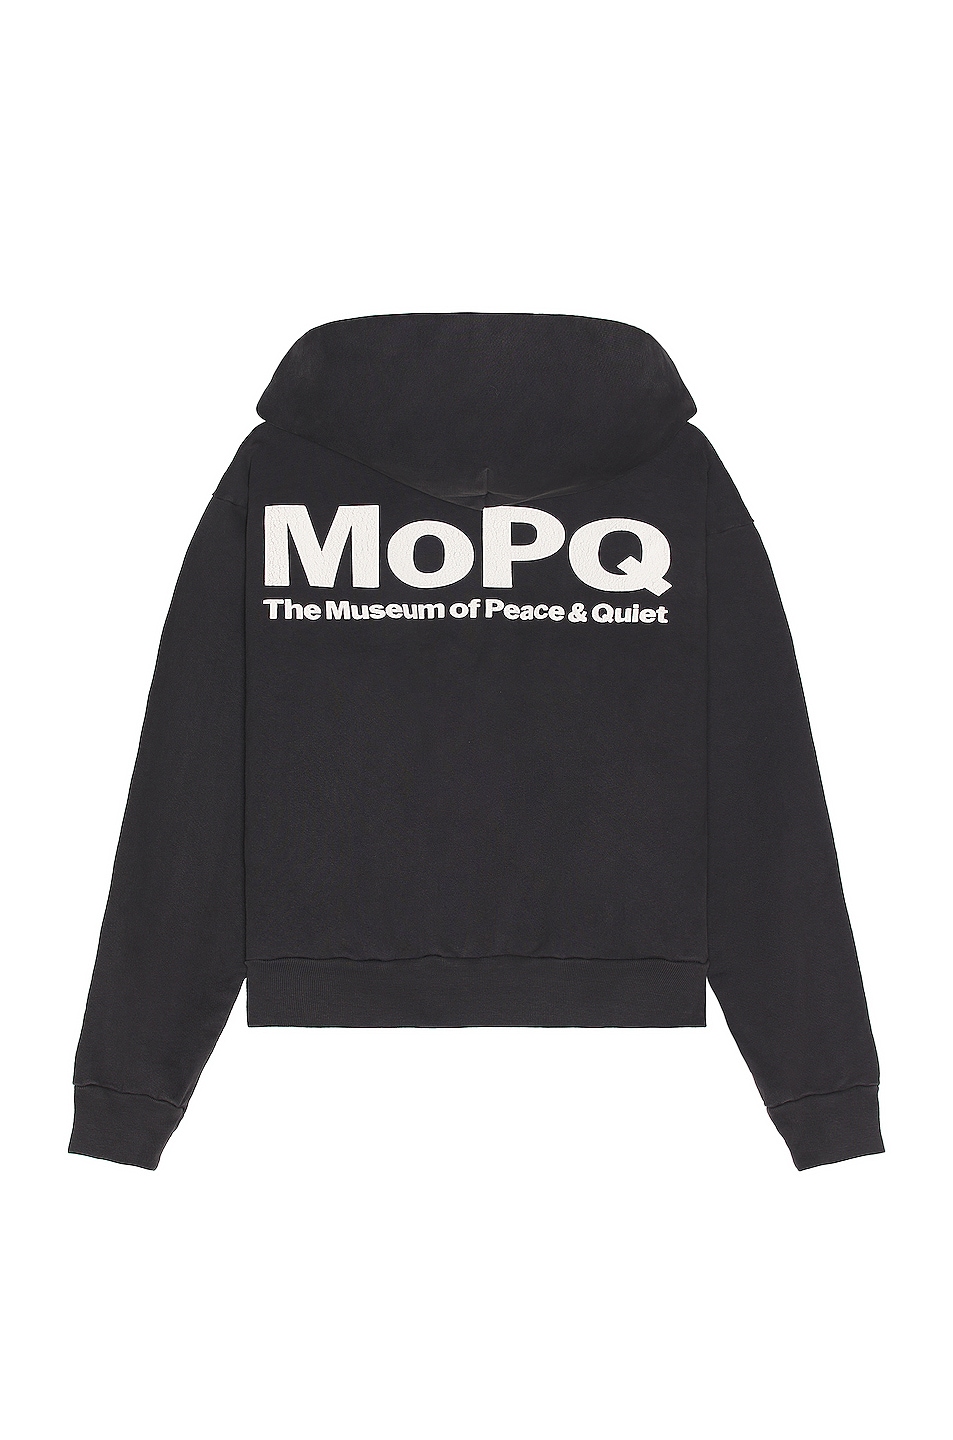 Image 1 of Museum of Peace and Quiet Contemporary Museum Zip Up Hoodie in Navy